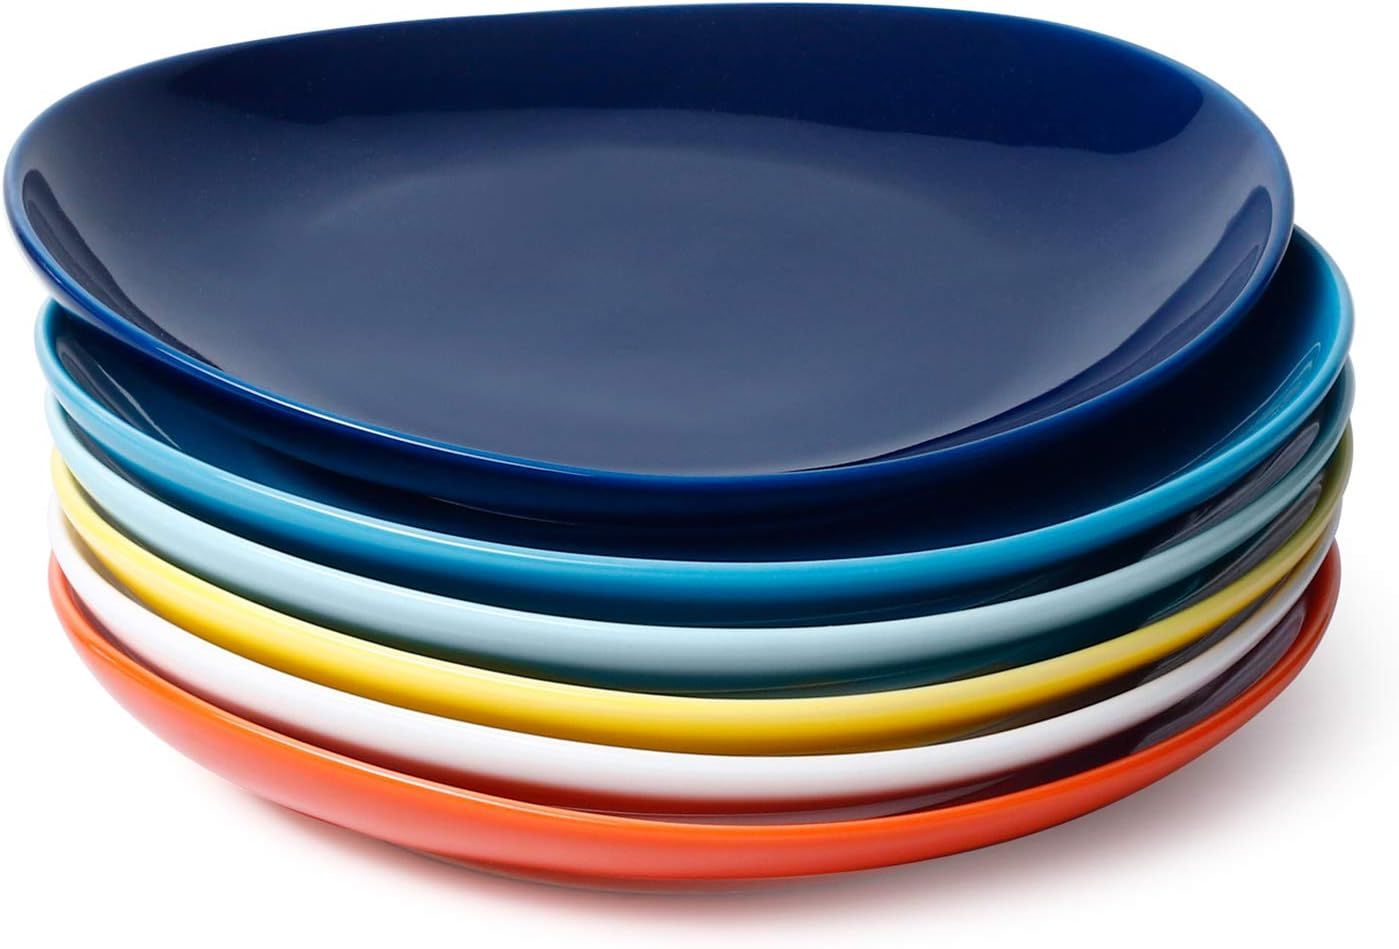 Sweese 151.002 Porcelain Dessert Salad Plates - 7.8 Inch - Set of 6, Multicolor, Hot Assorted Col... | Amazon (US)